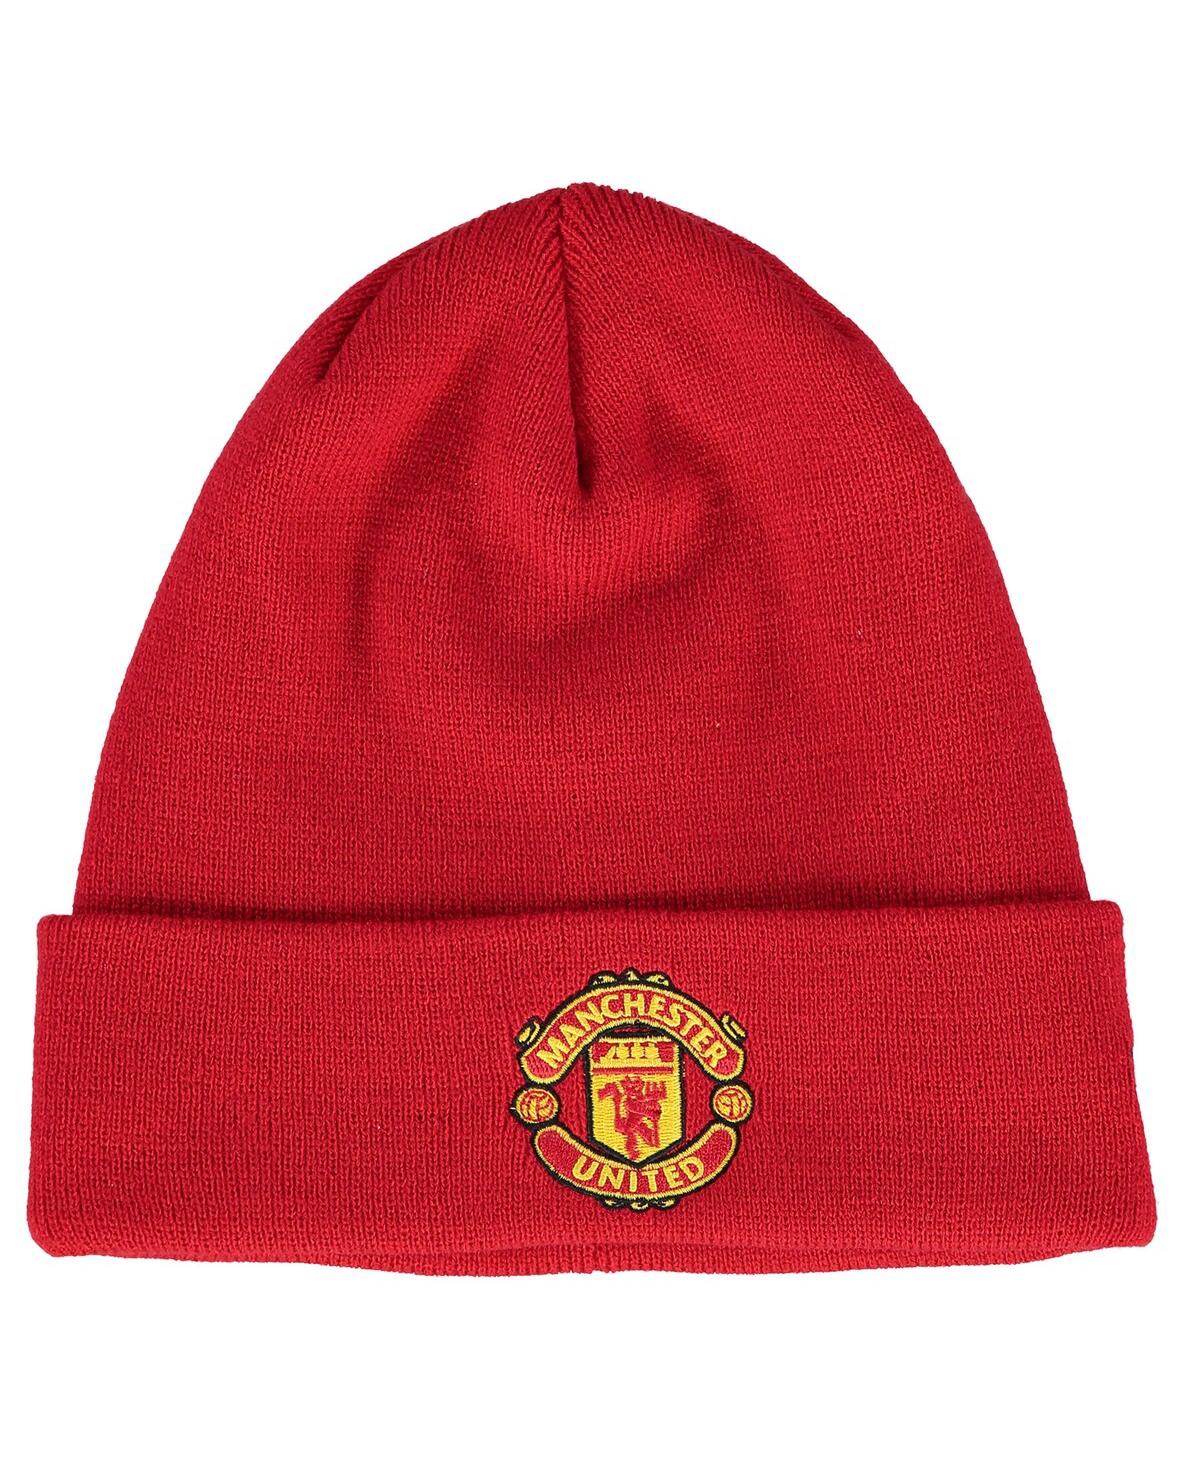 New Era Men's And Women's  Red Manchester United Basic Cuffed Knit Hat